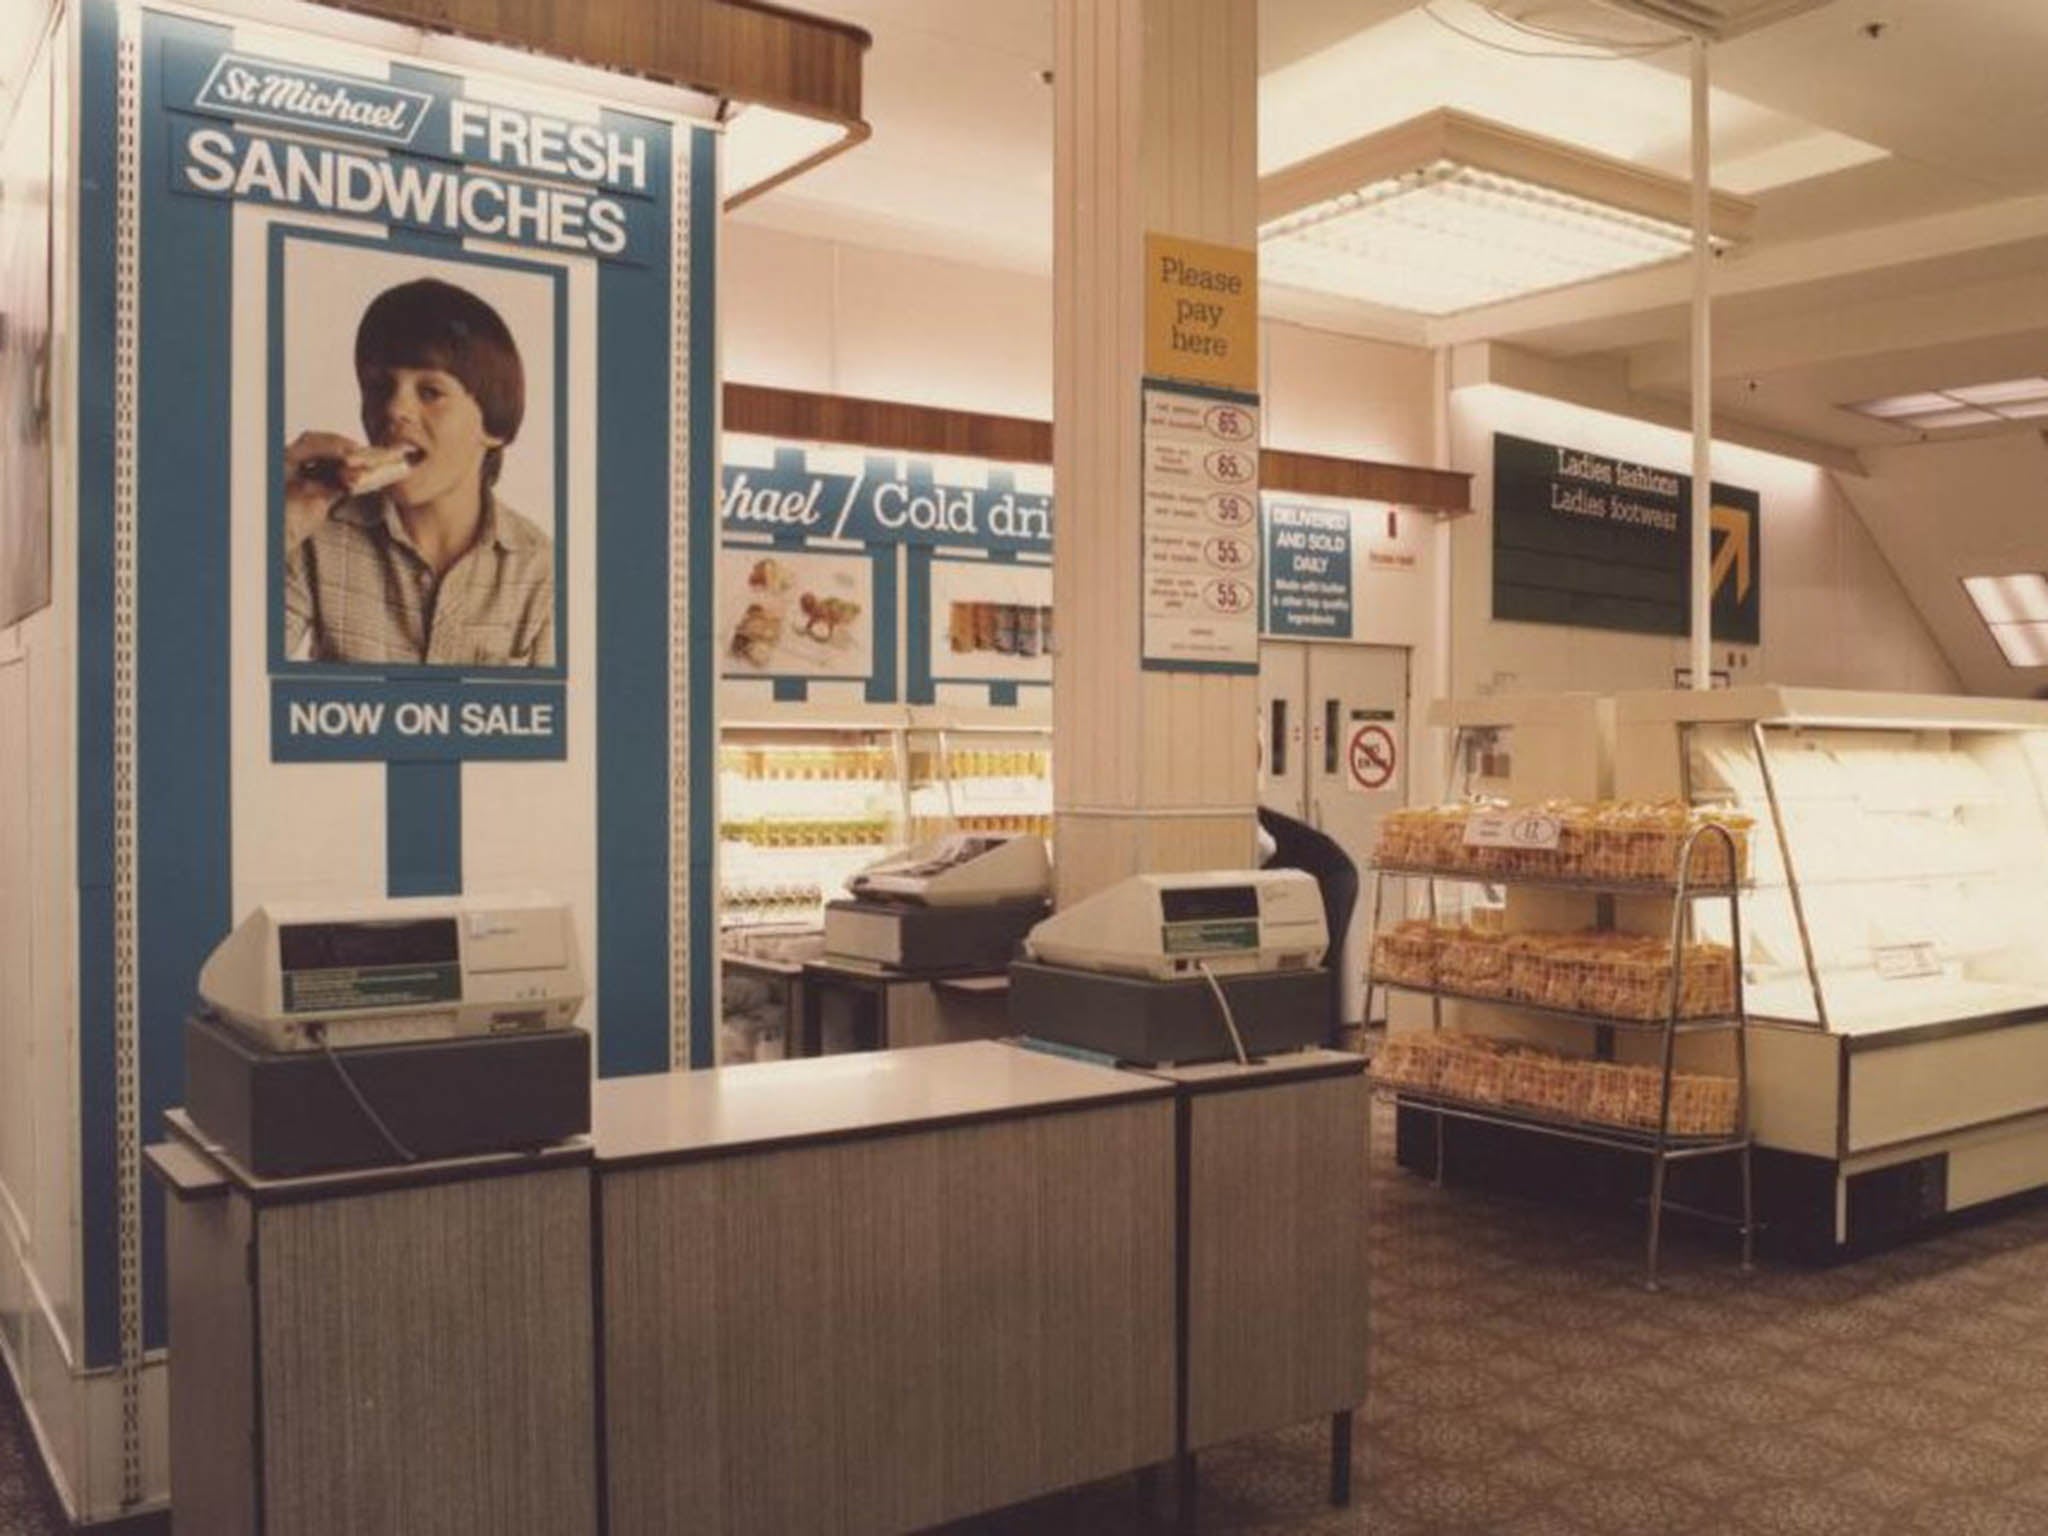 The sandwich bar in the Marble Arch store in London in 1982 (The M&amp;S Company Archive)